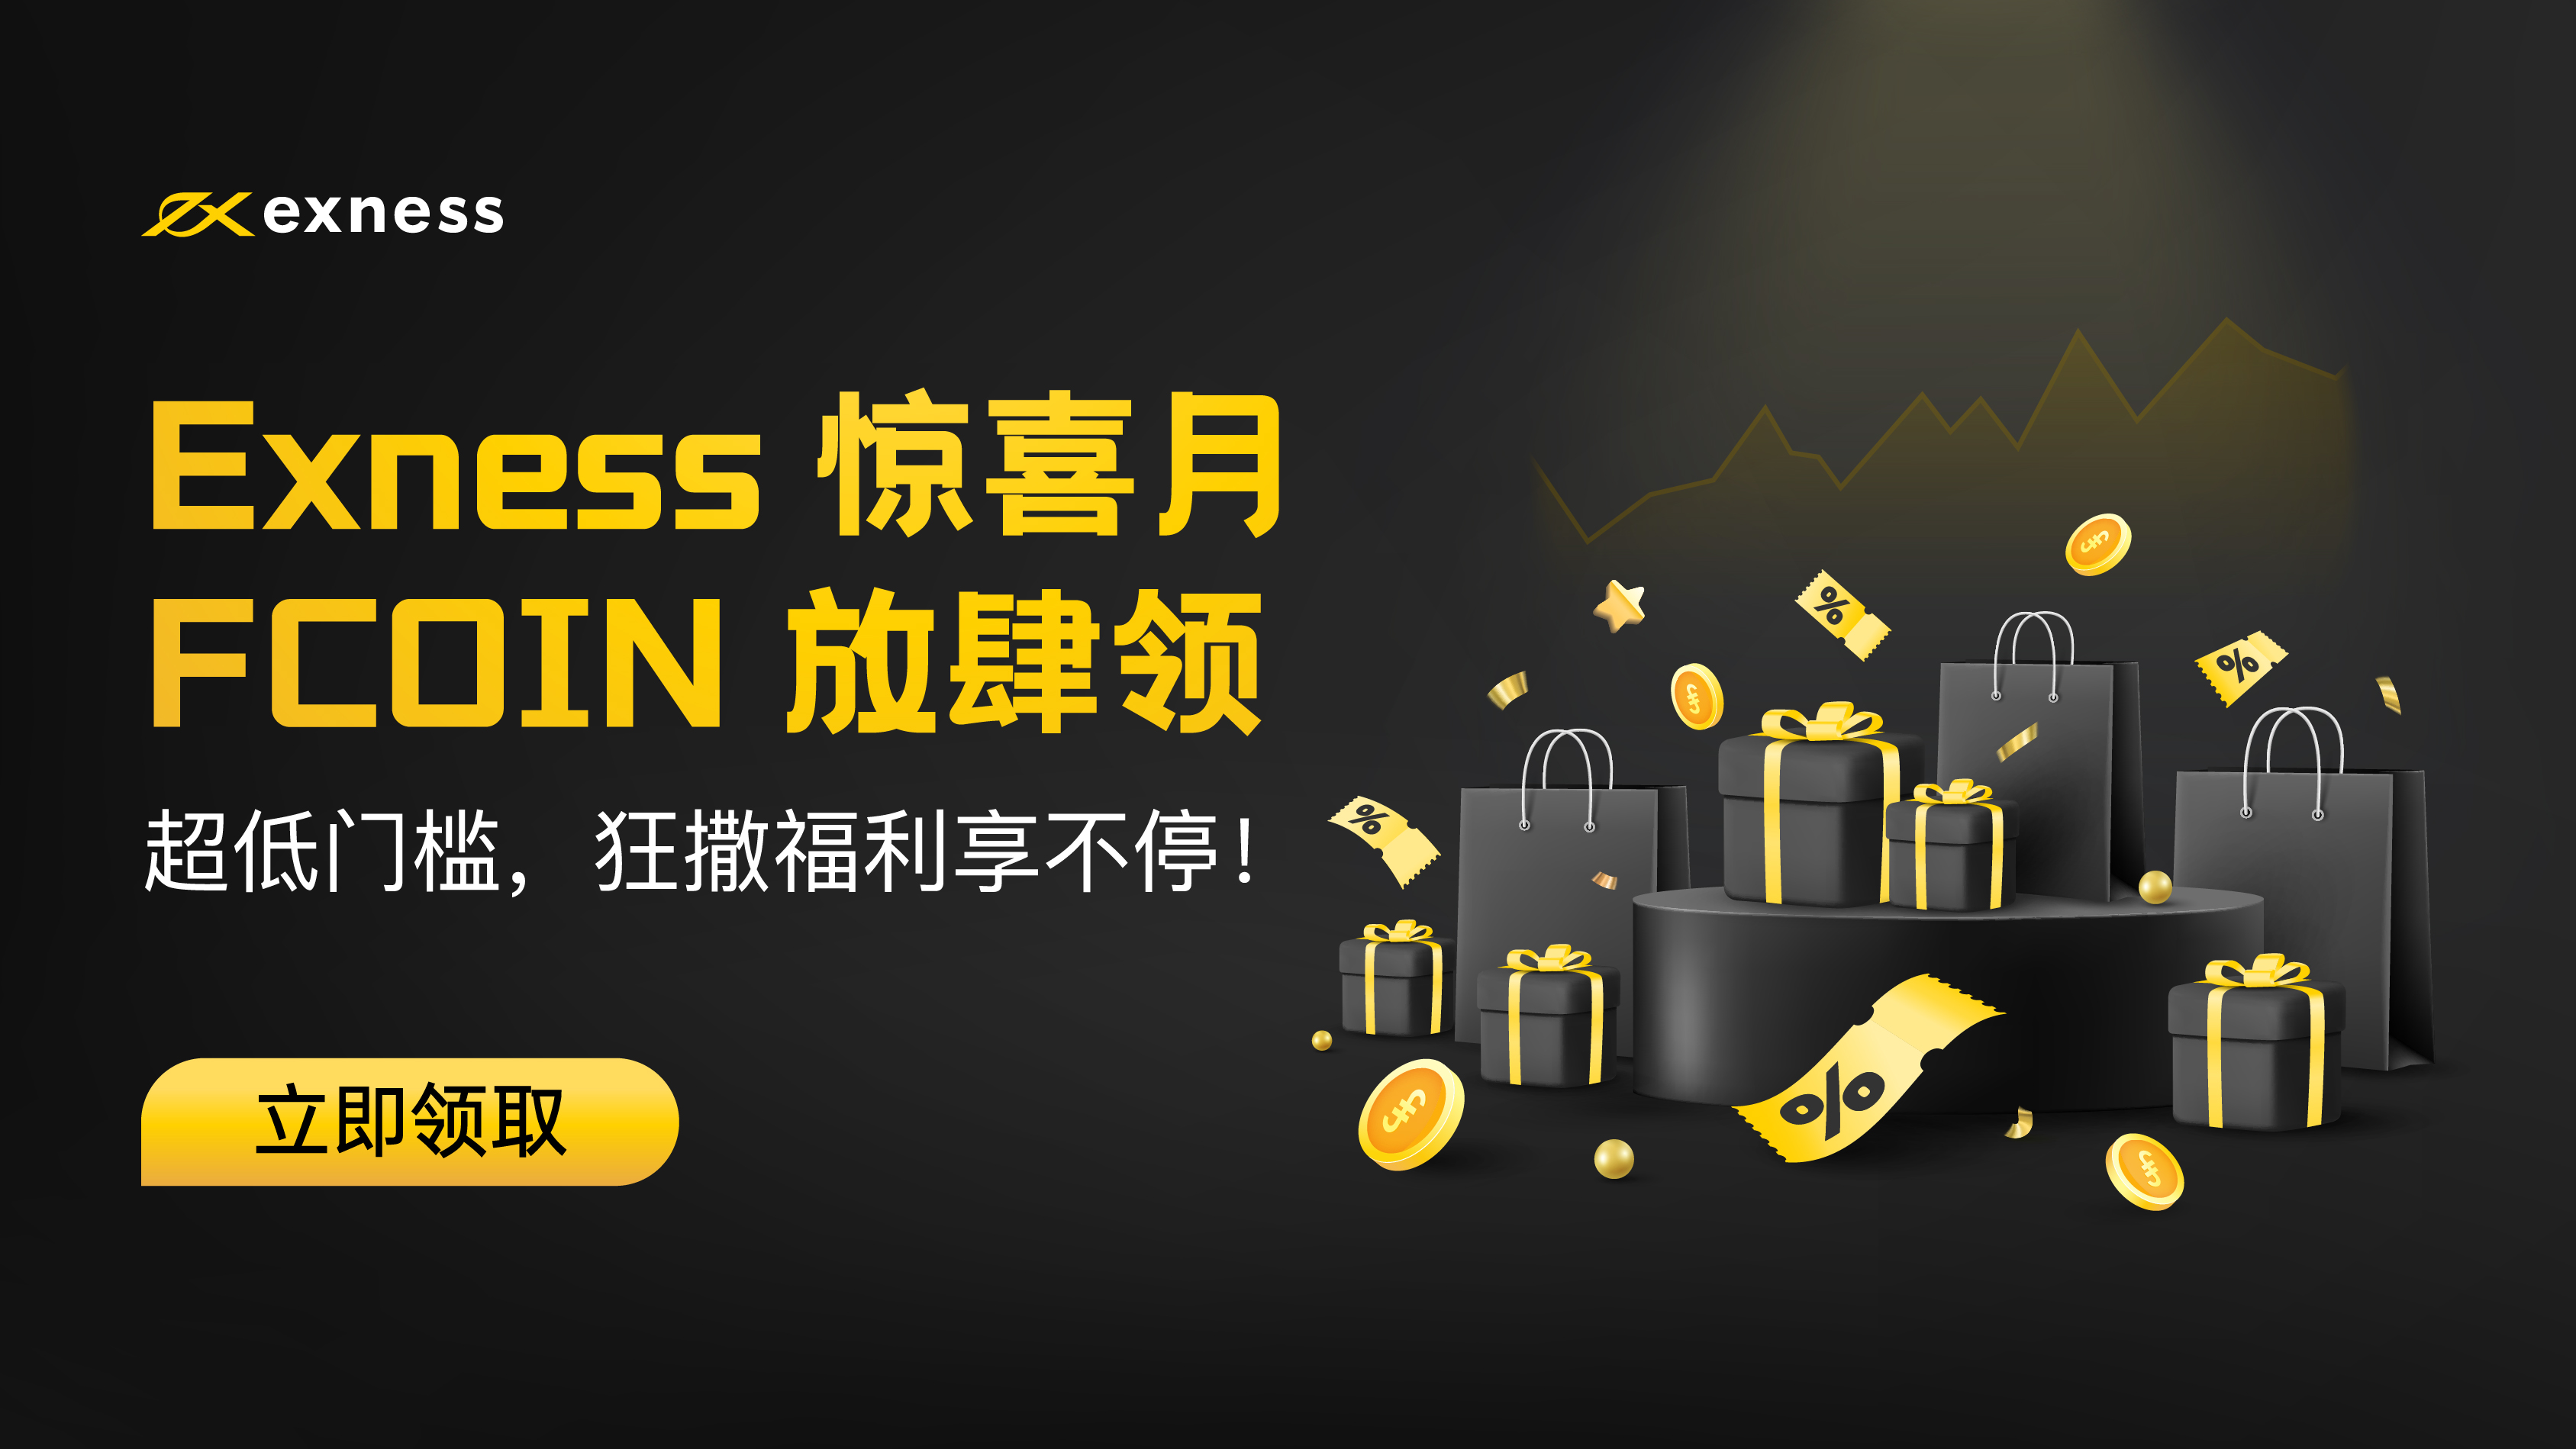 Exness 惊喜月！FCOIN 放肆领！